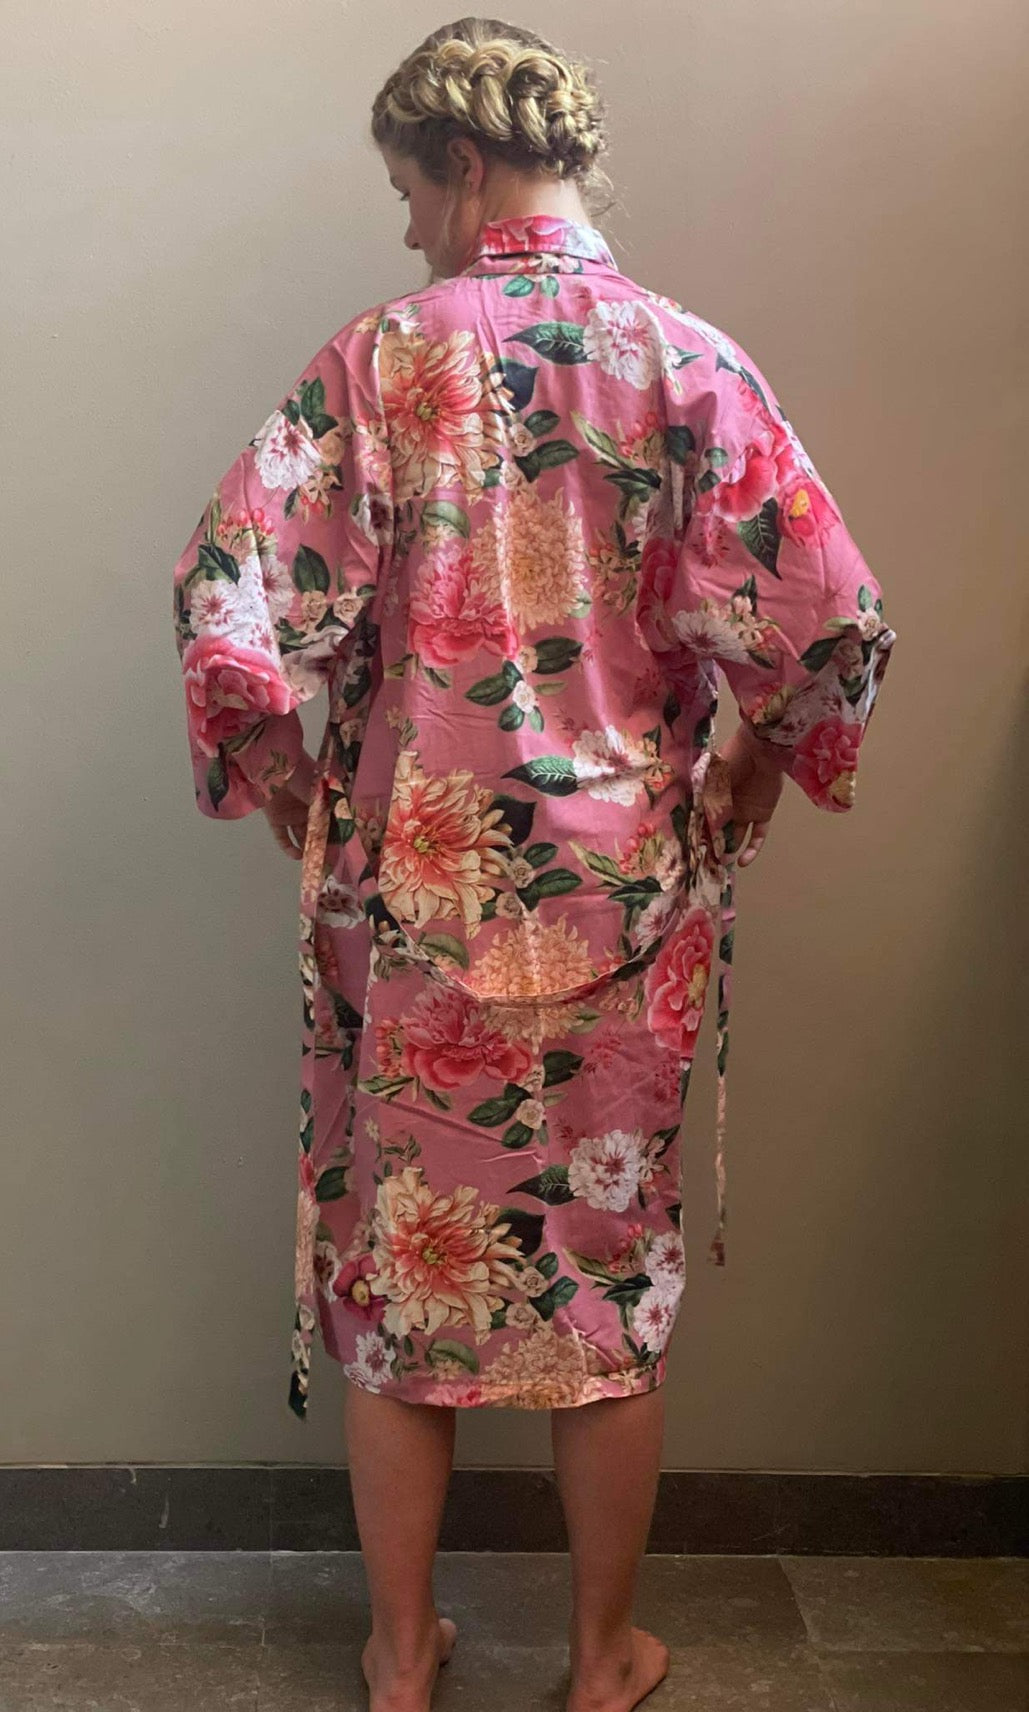 Woman in pink kimono robe with flowers